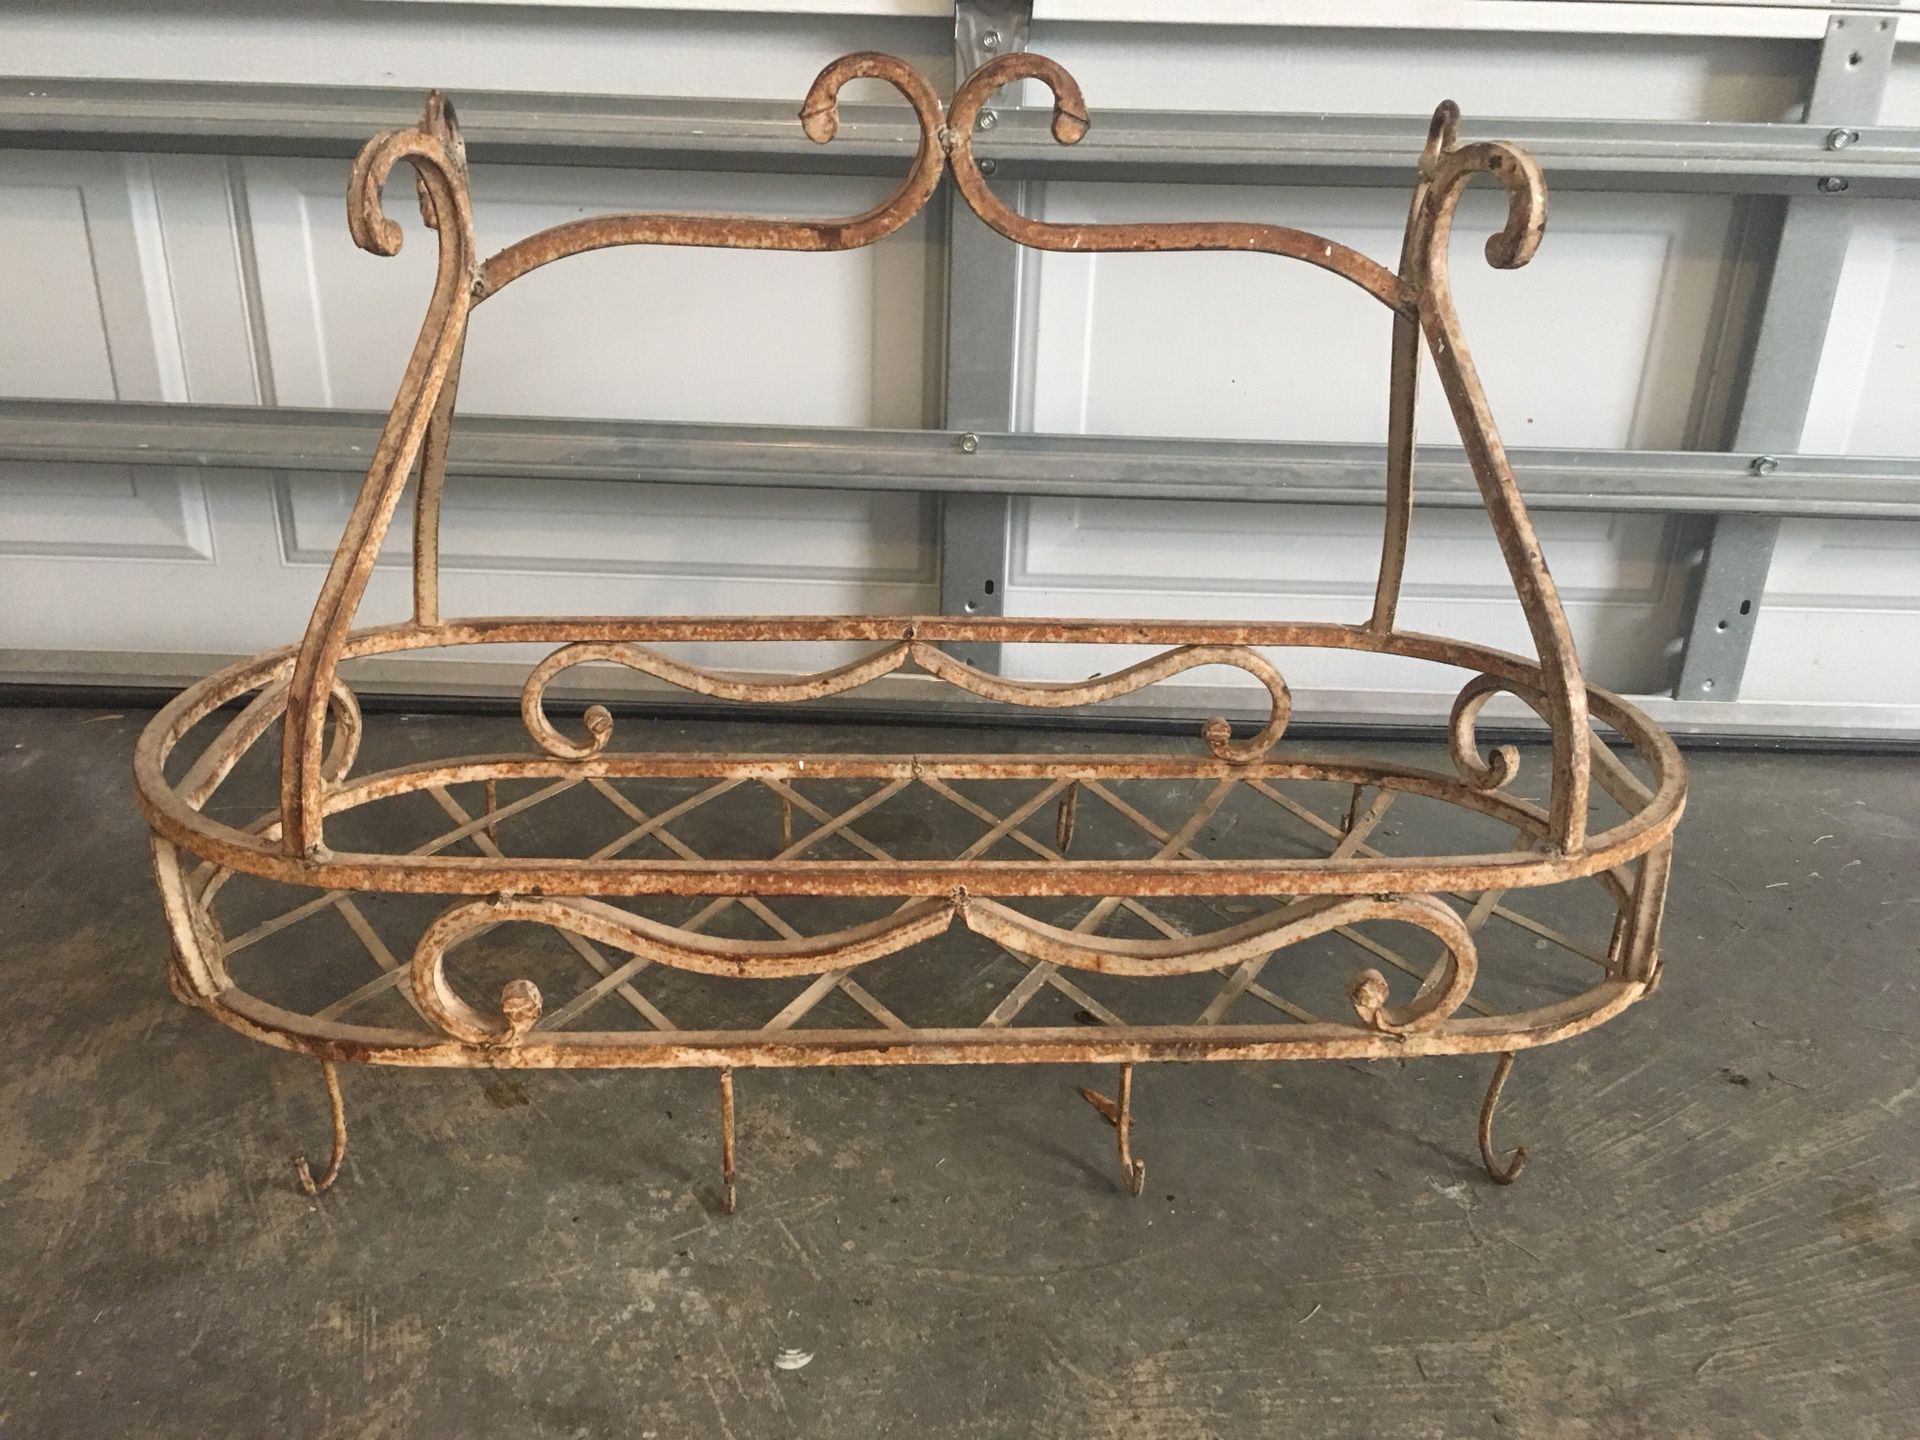 French Country pot rack - Must go ASAP!!! - Only $20!